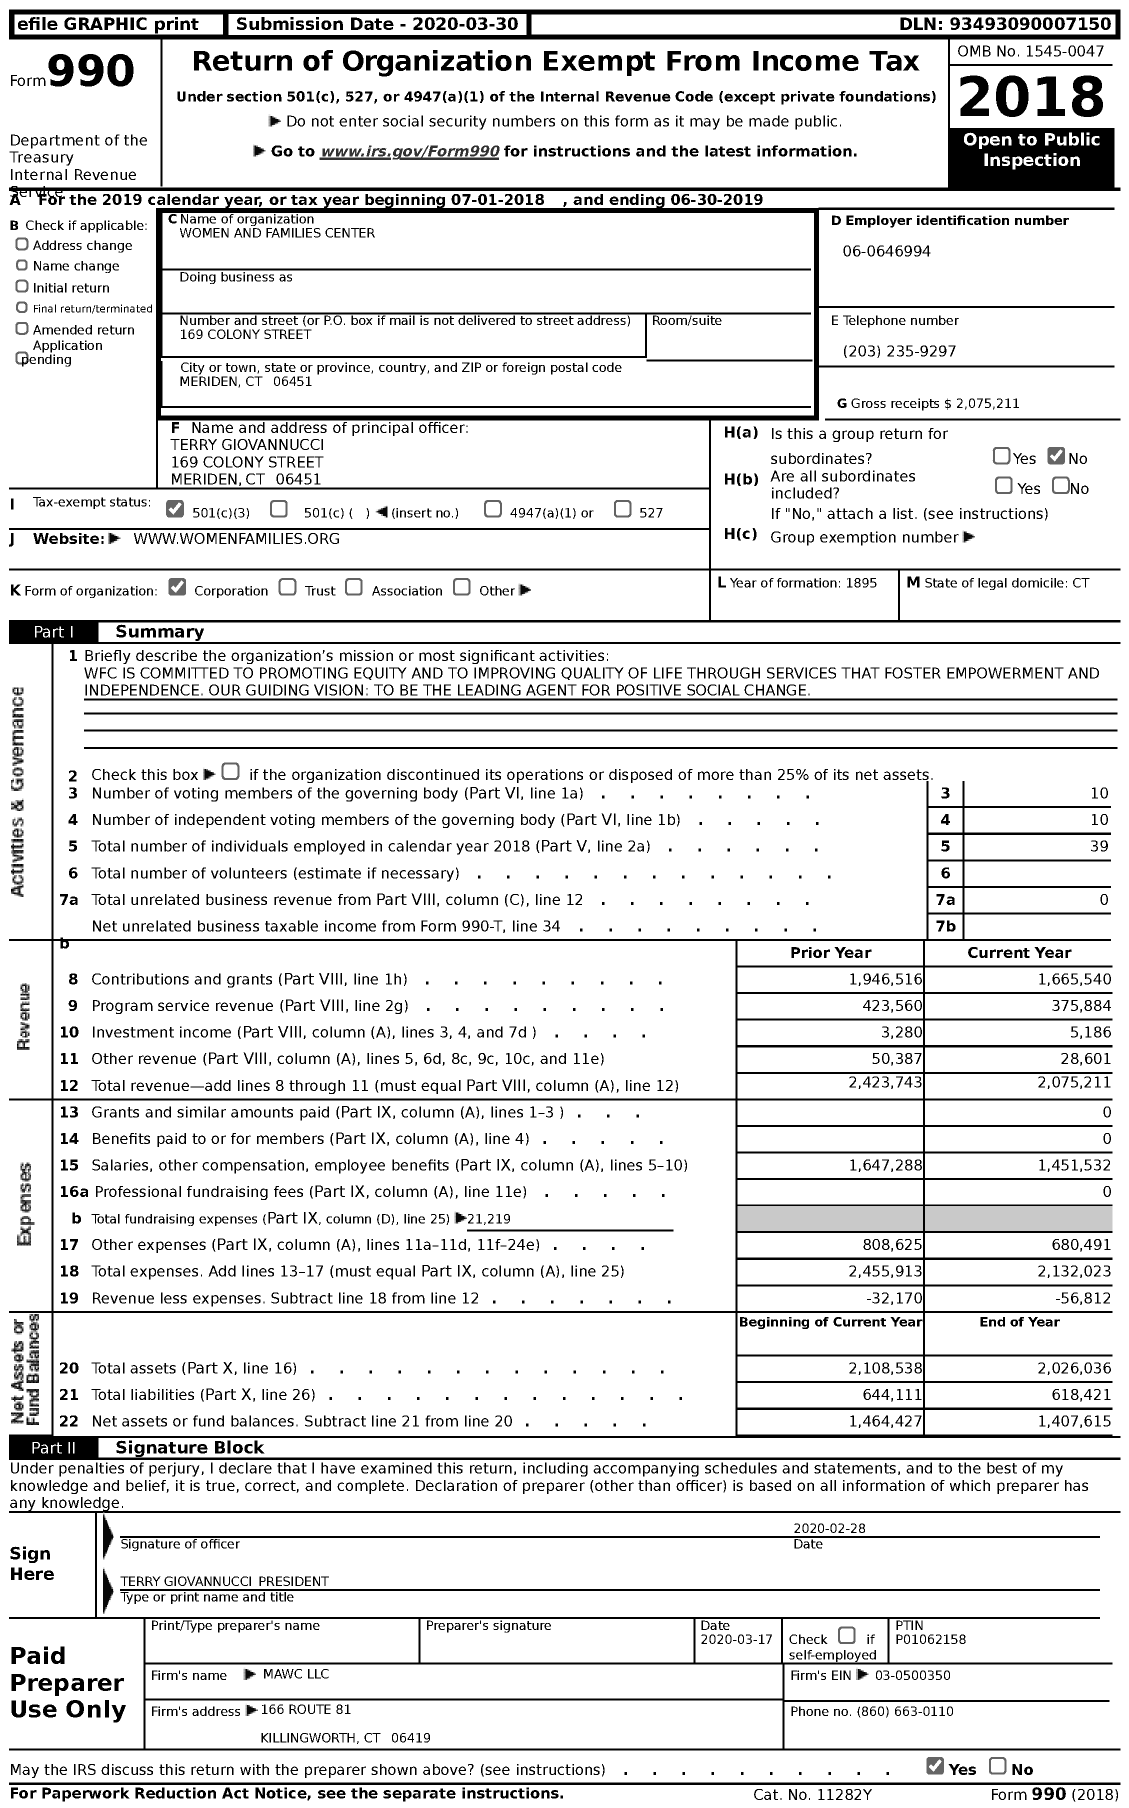 Image of first page of 2018 Form 990 for Women and Families Center (WFC)